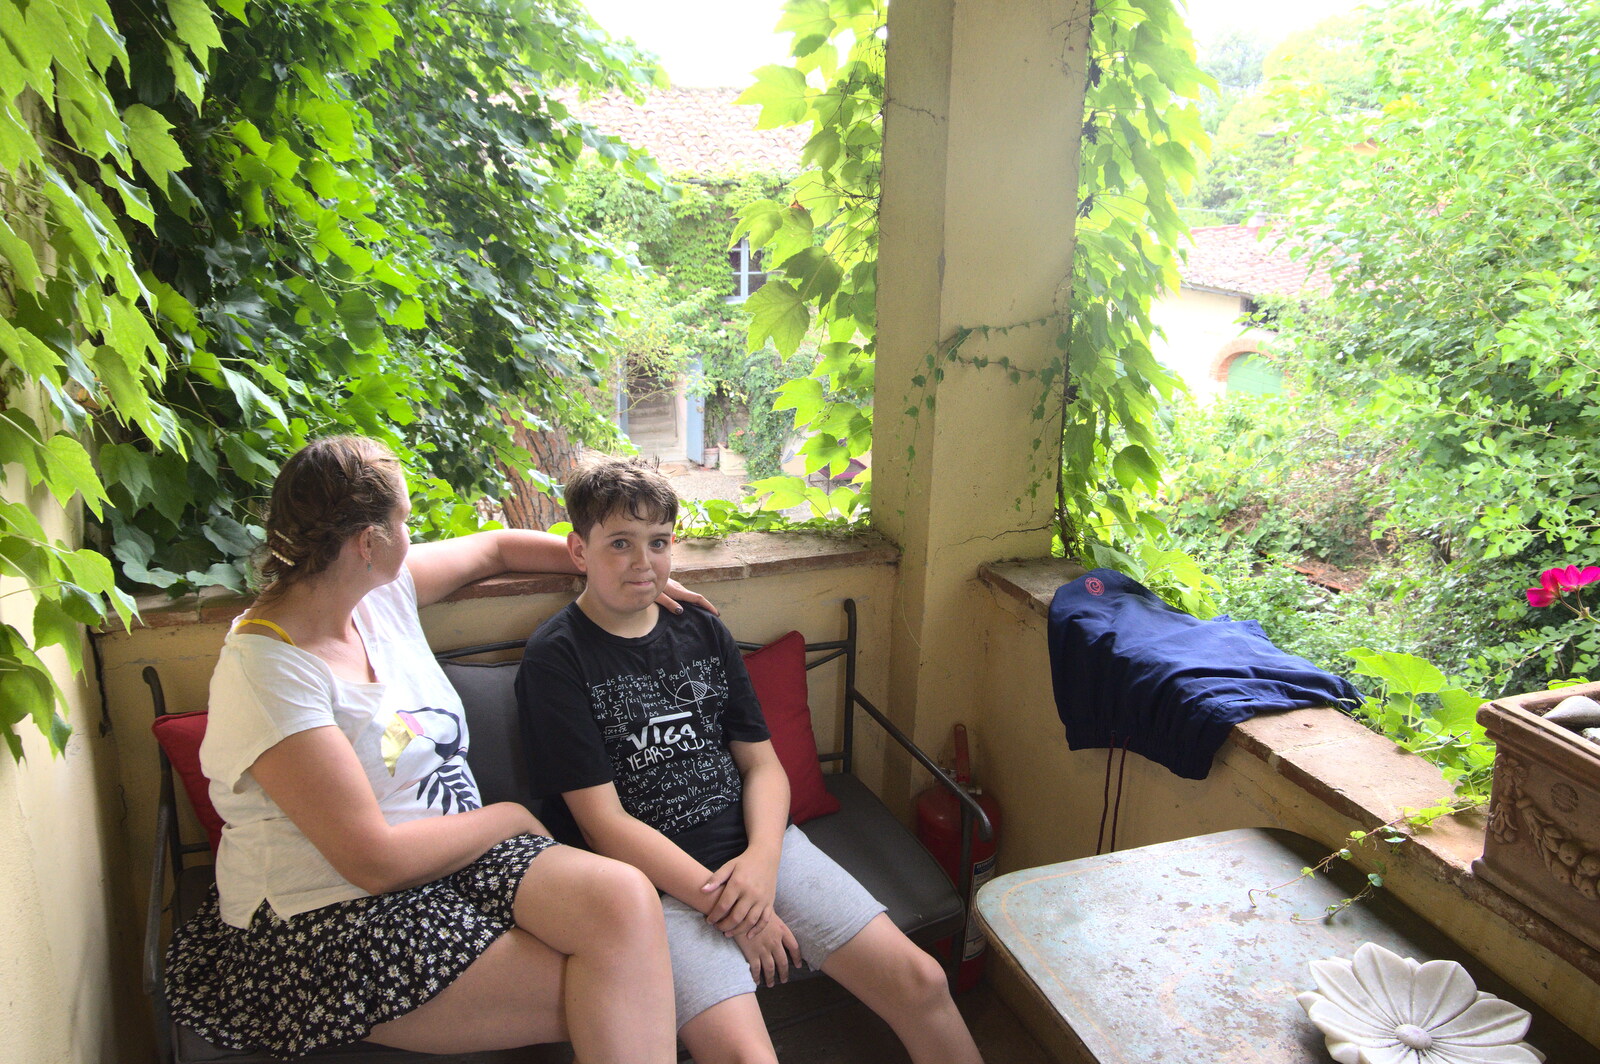 The Flags of Arezzo, Tuscany, Italy - 28th August 2022: Isobel and Fred on the balcony